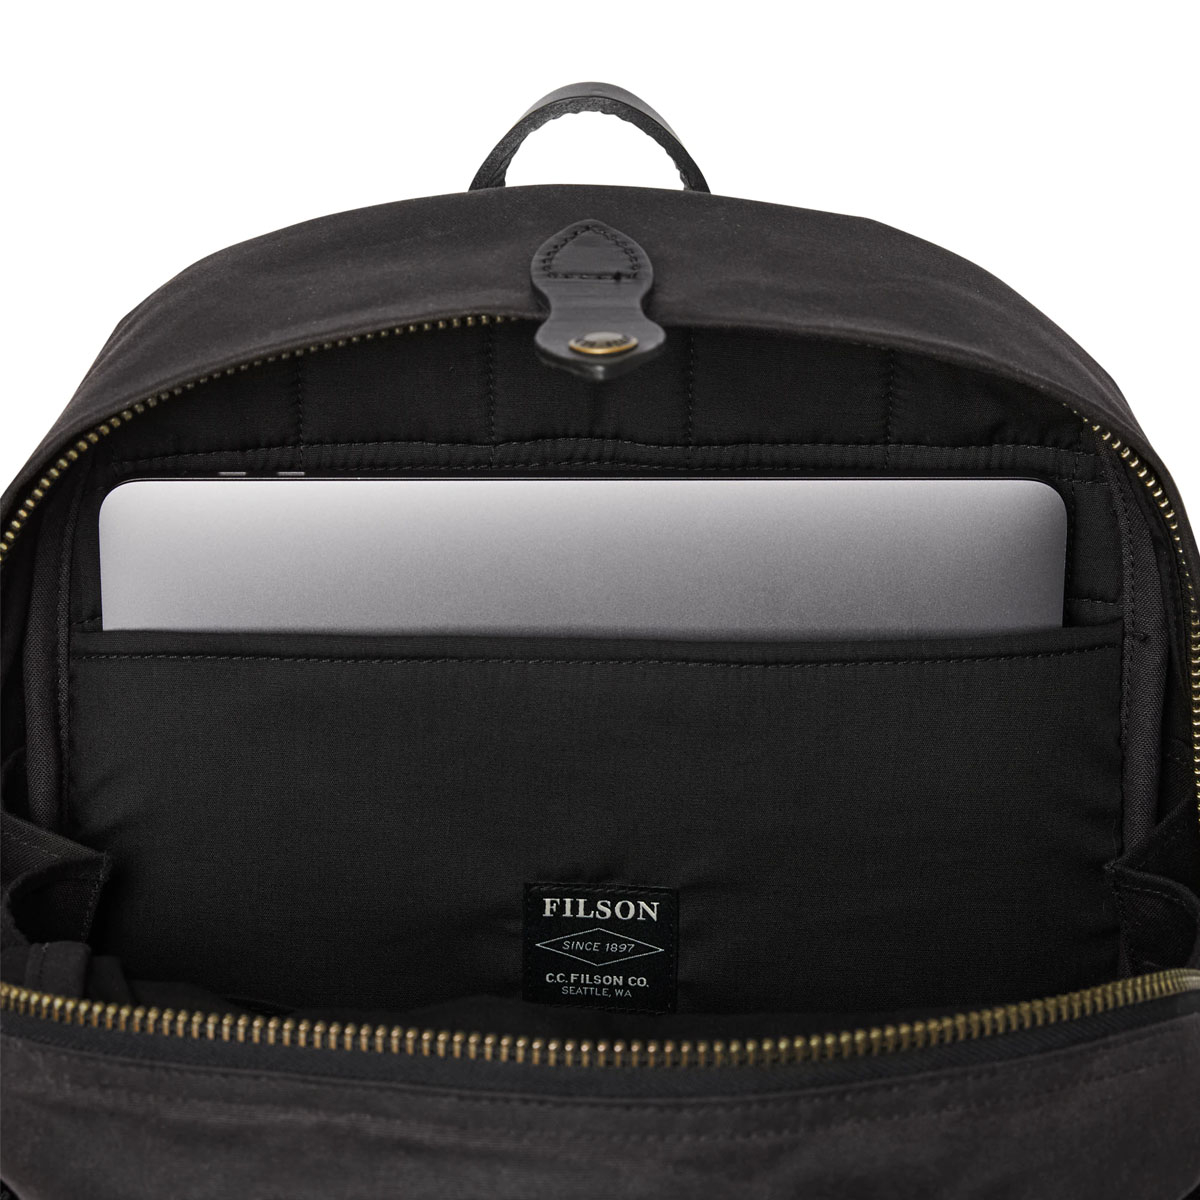 Filson Journeyman Backpack 20231638 Cinder, also for corporate use with laptop